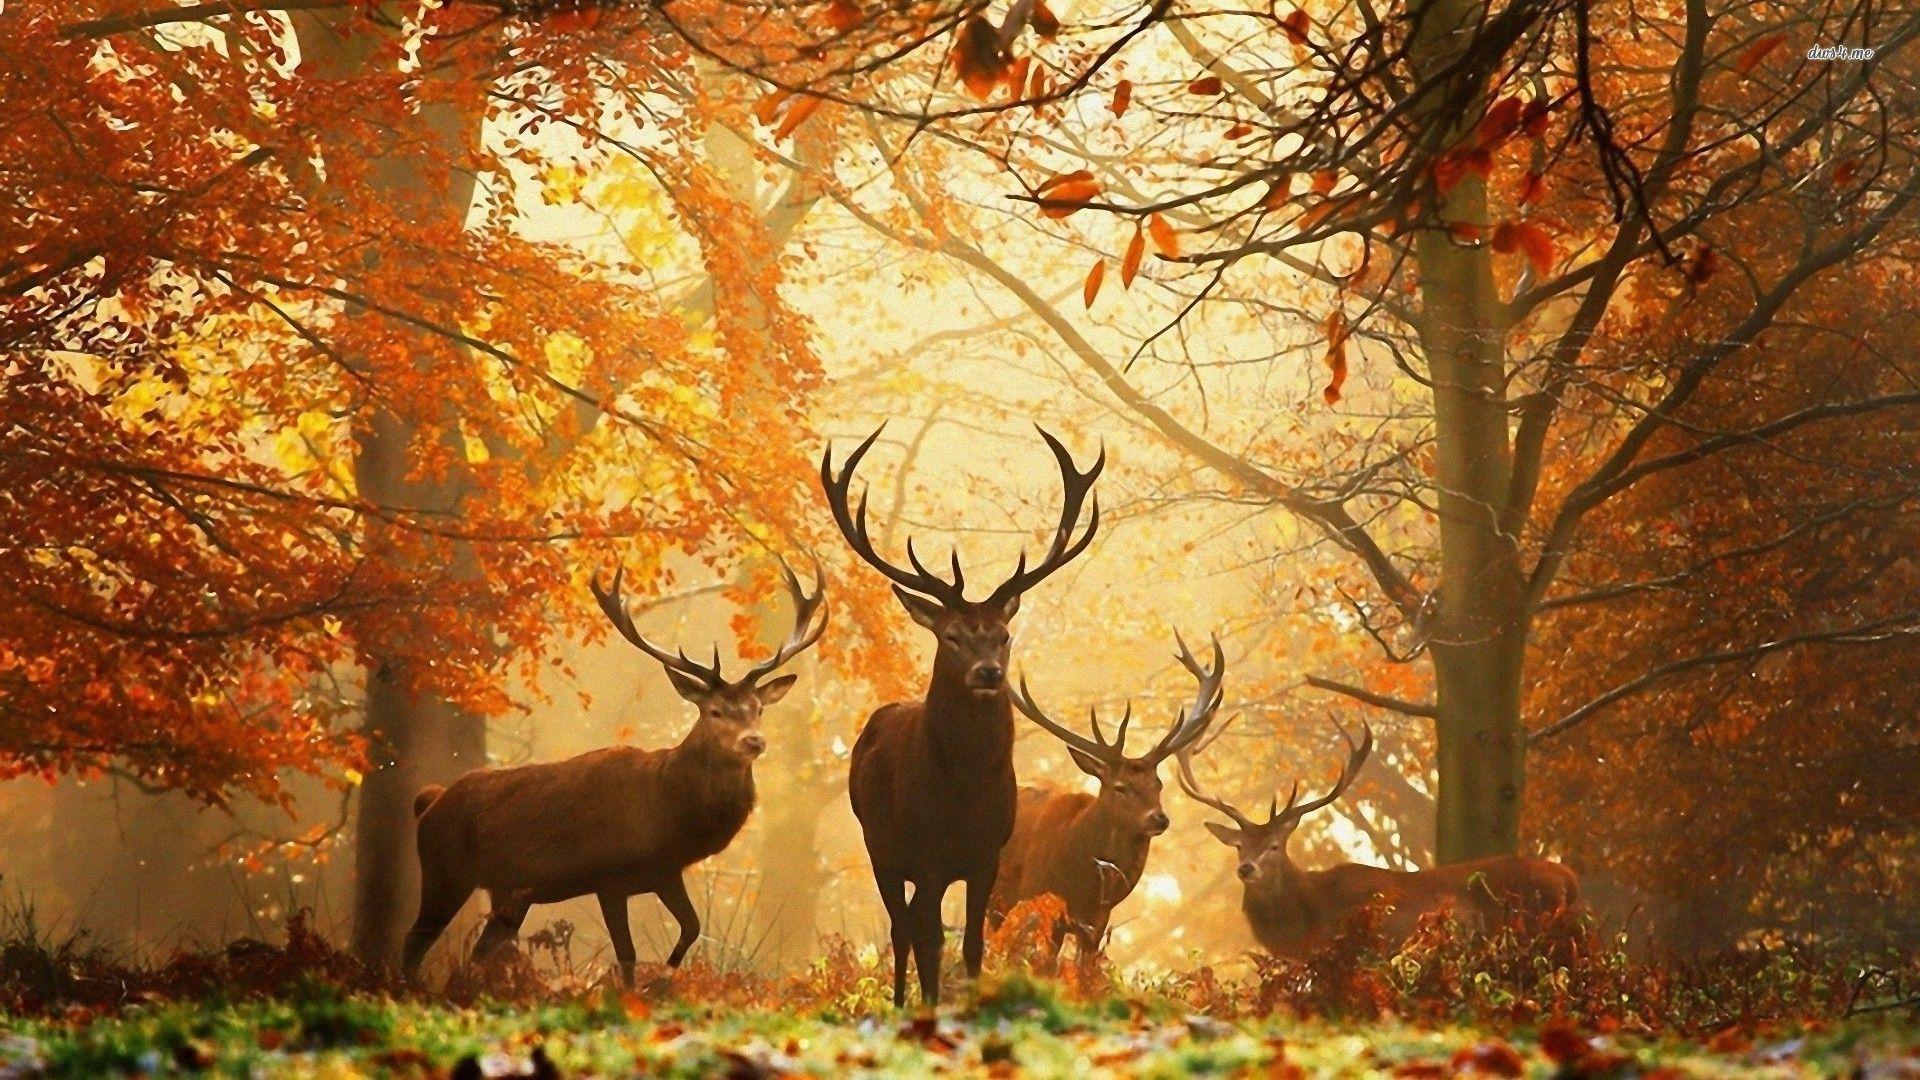 Deers in the autumn forest HD wallpaper. Animal wallpaper, Autumn forest, Fall wallpaper